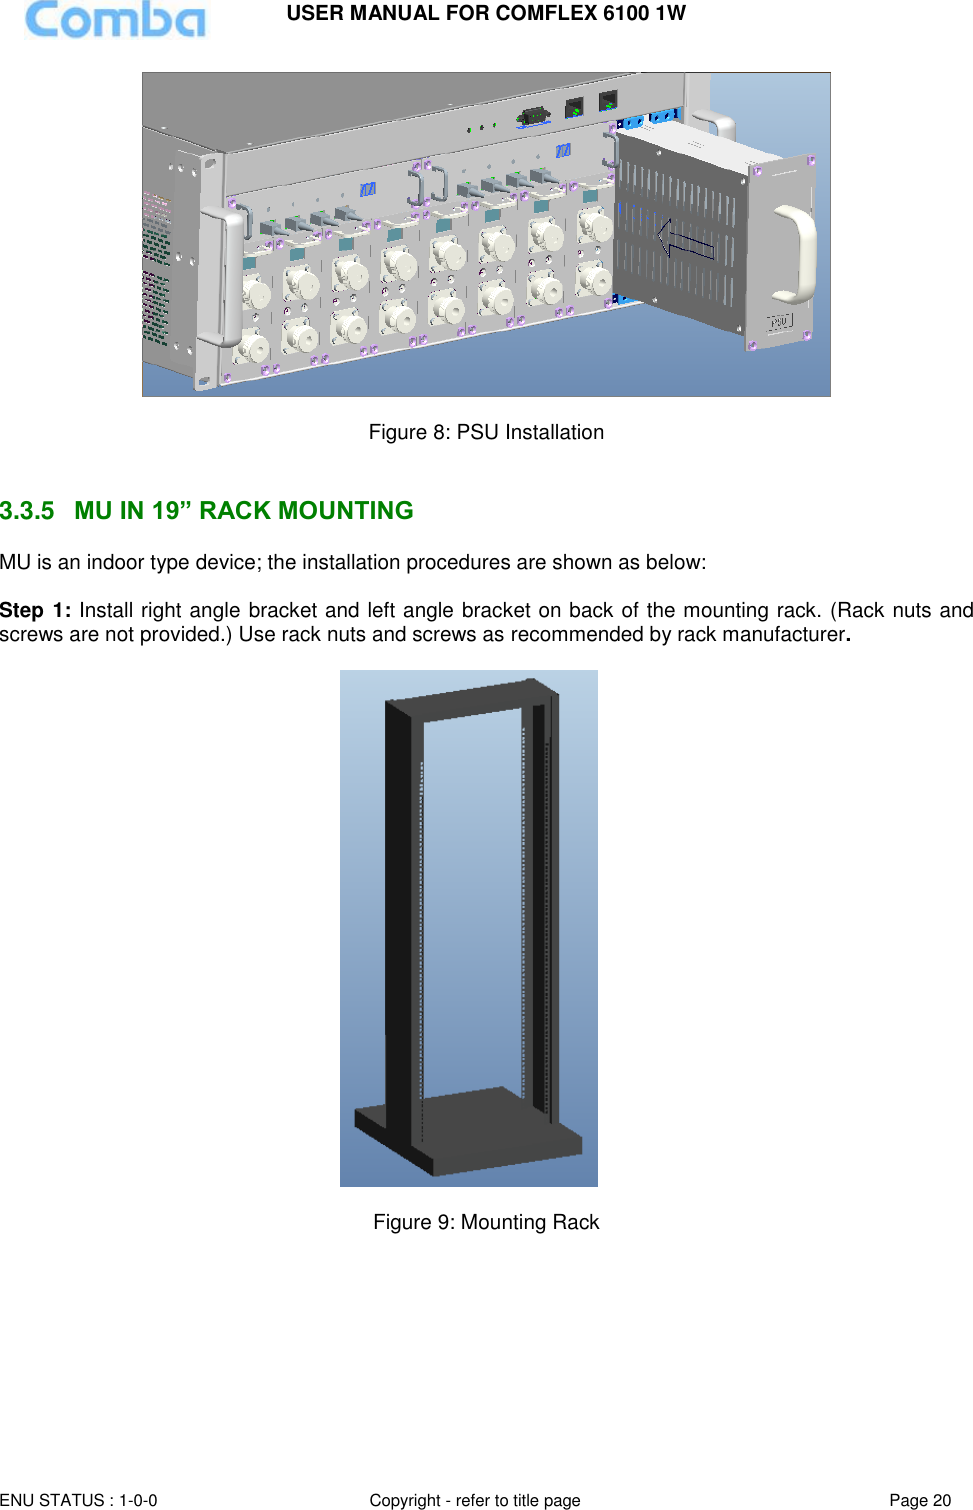 USER MANUAL FOR COMFLEX 6100 1W ENU STATUS : 1-0-0 Copyright - refer to title page Page 20    Figure 8: PSU Installation   3.3.5  MU IN 19” RACK MOUNTING MU is an indoor type device; the installation procedures are shown as below:  Step 1: Install right angle bracket and left angle bracket on back of the mounting rack. (Rack nuts and screws are not provided.) Use rack nuts and screws as recommended by rack manufacturer.    Figure 9: Mounting Rack    